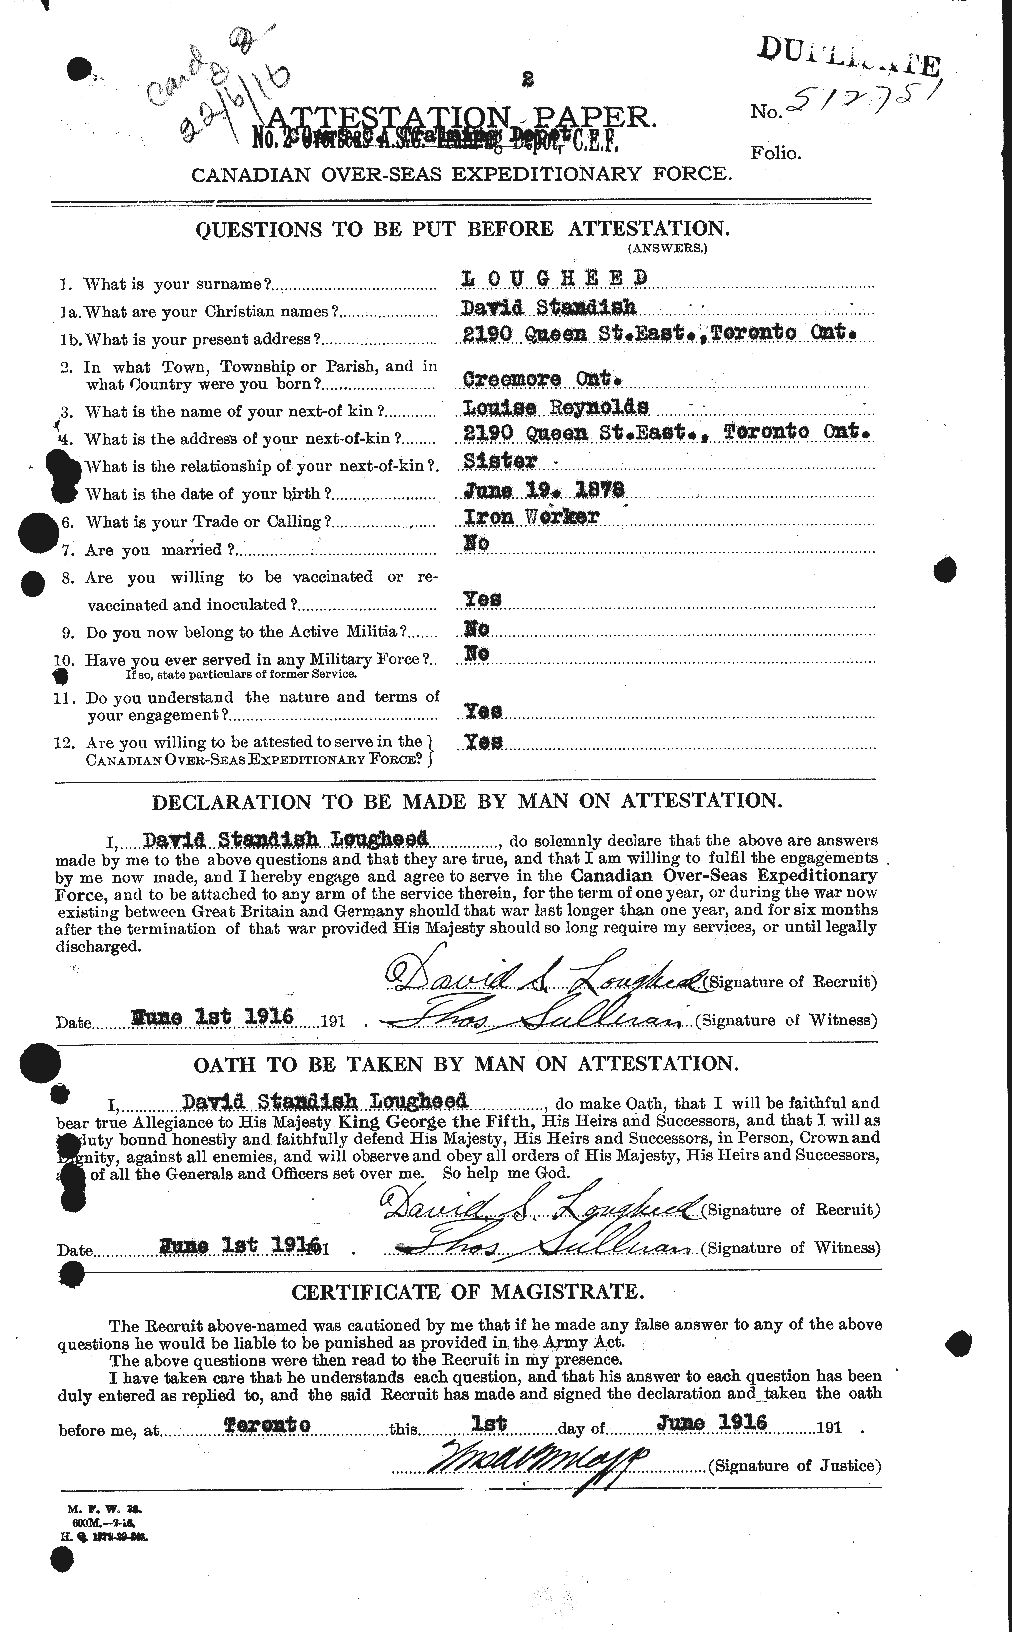 Personnel Records of the First World War - CEF 470389a